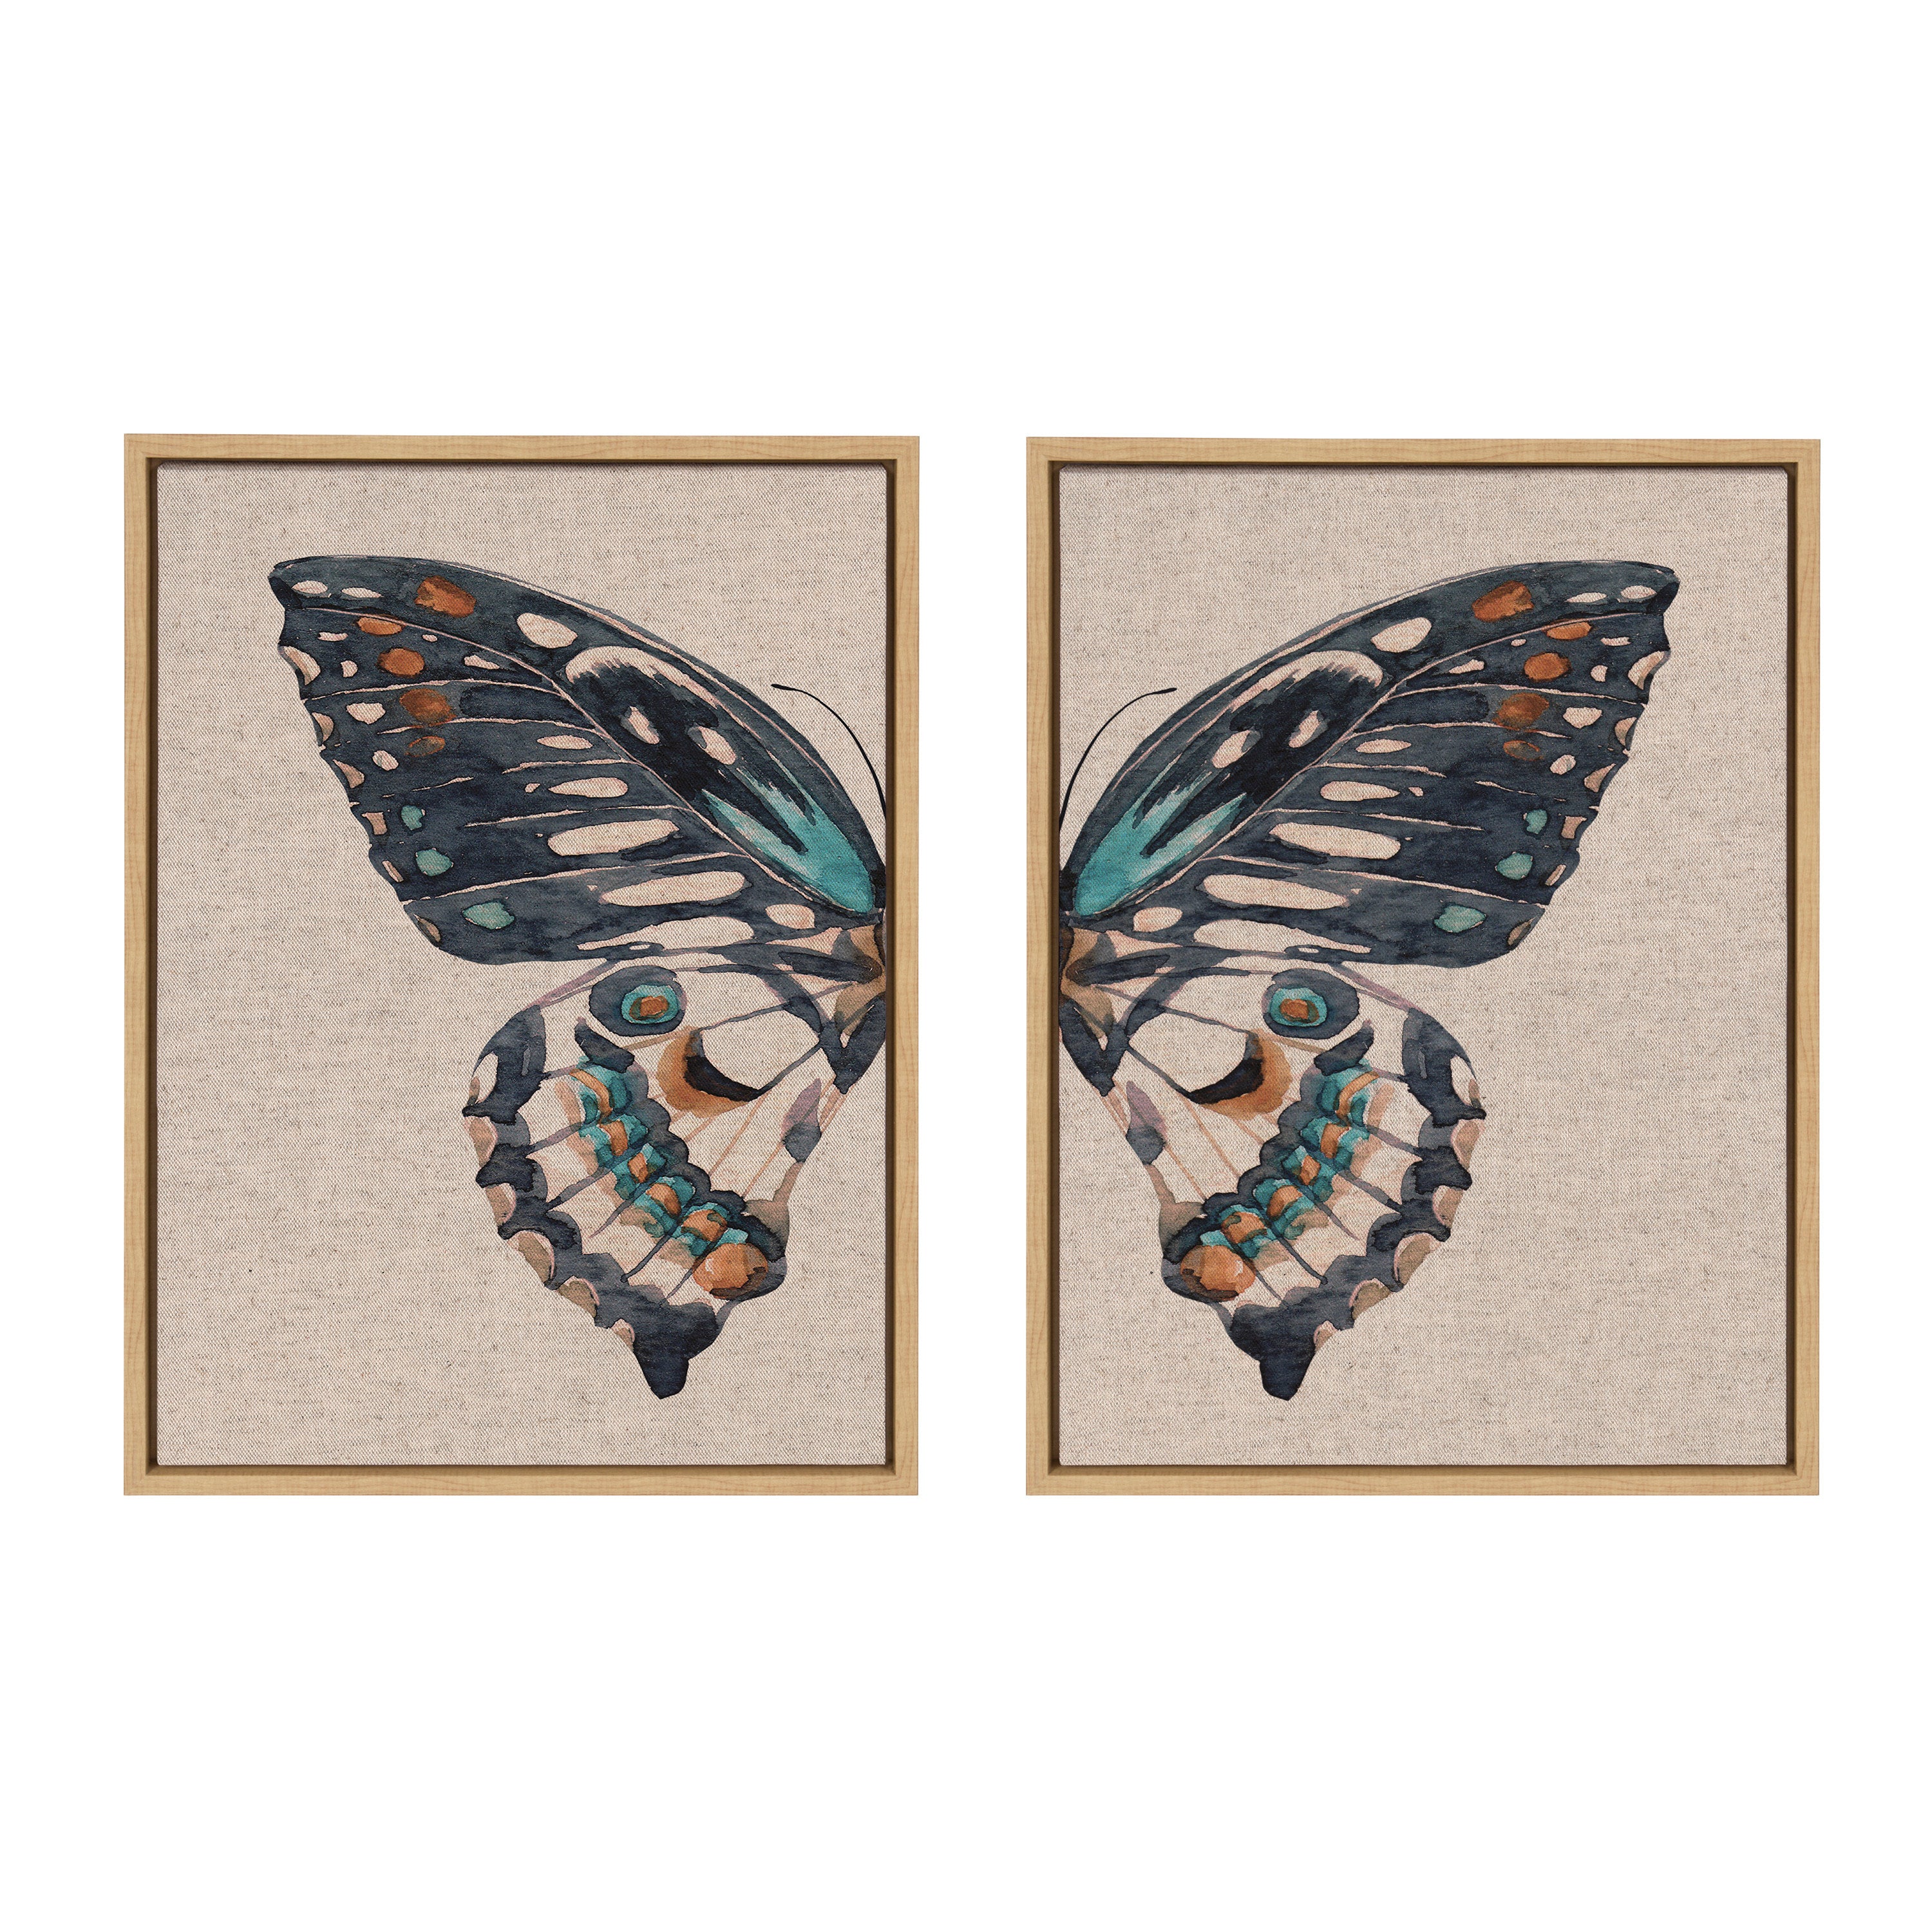 Sylvie Boho Butterfly Watercolor Diptych Neutral Linen Framed Canvas Art Set by The Creative Bunch Studio